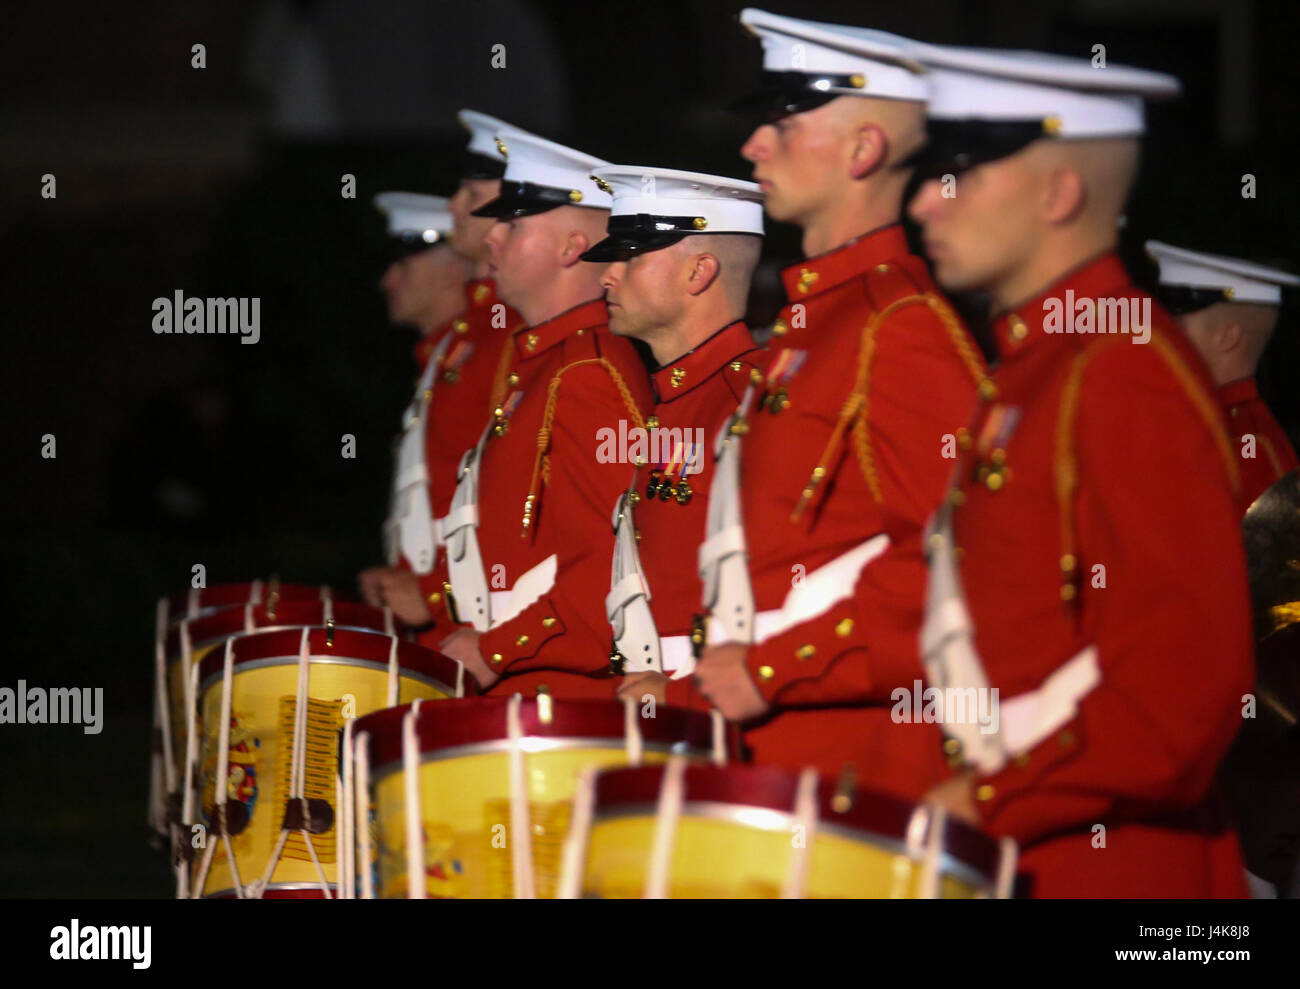 Marines with “The Commandant’s Own” the U.S. Marine Drum and Bugle Corps, perform “music in motion” during a Friday Evening Parade at Marine Barracks Washington D.C., May 5, 2017. The guests of honor for the parade were the Honorable Paul Cook, California’s 8th Congressional District Congressman, the Honorable Jack Bergman, Michigan’s 1st Congressional District Congressman, and the Honorable Salud Carbajal, California’s 24th Congressional District Congressman. The hosting official was Gen. Glenn Walters, assistant commandant of the Marine Corps.(Official Marine Corps photo by Lance Cpl. Damon  Stock Photo